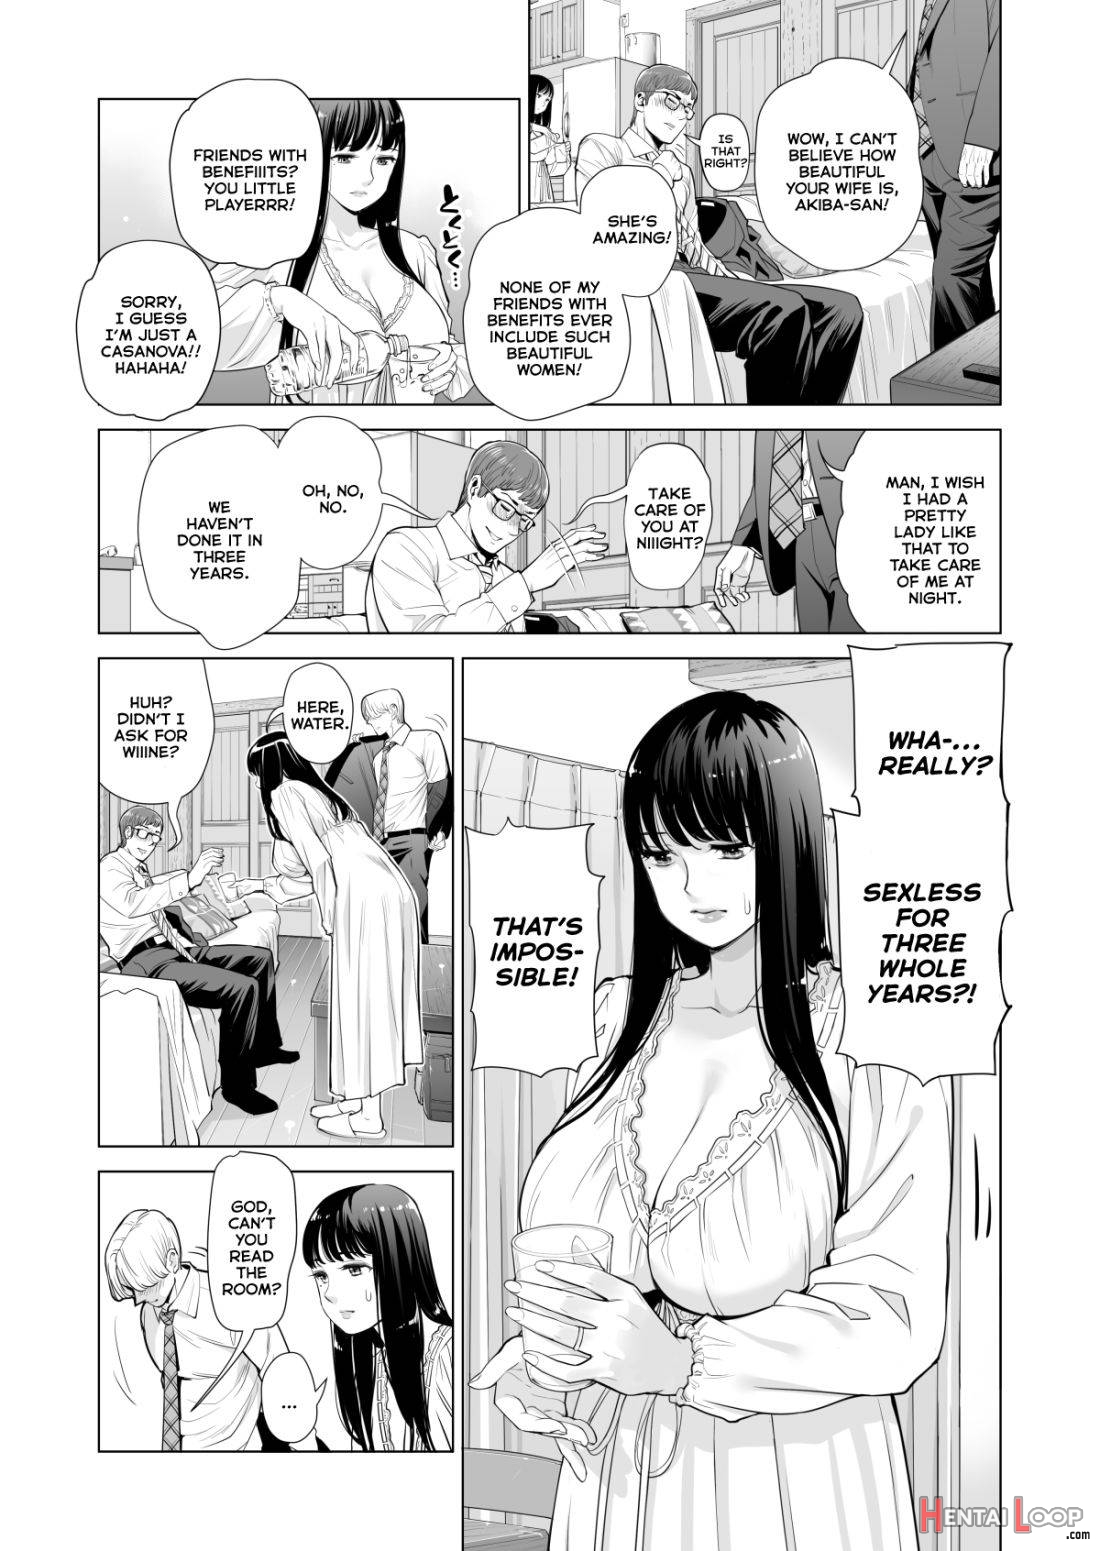 Tsukiyo no Midare Zake (Zenpen) Moonlit Intoxication ~ A Housewife Stolen by a Coworker Besides her Blackout Drunk Husband ~ Chapter 1 page 15